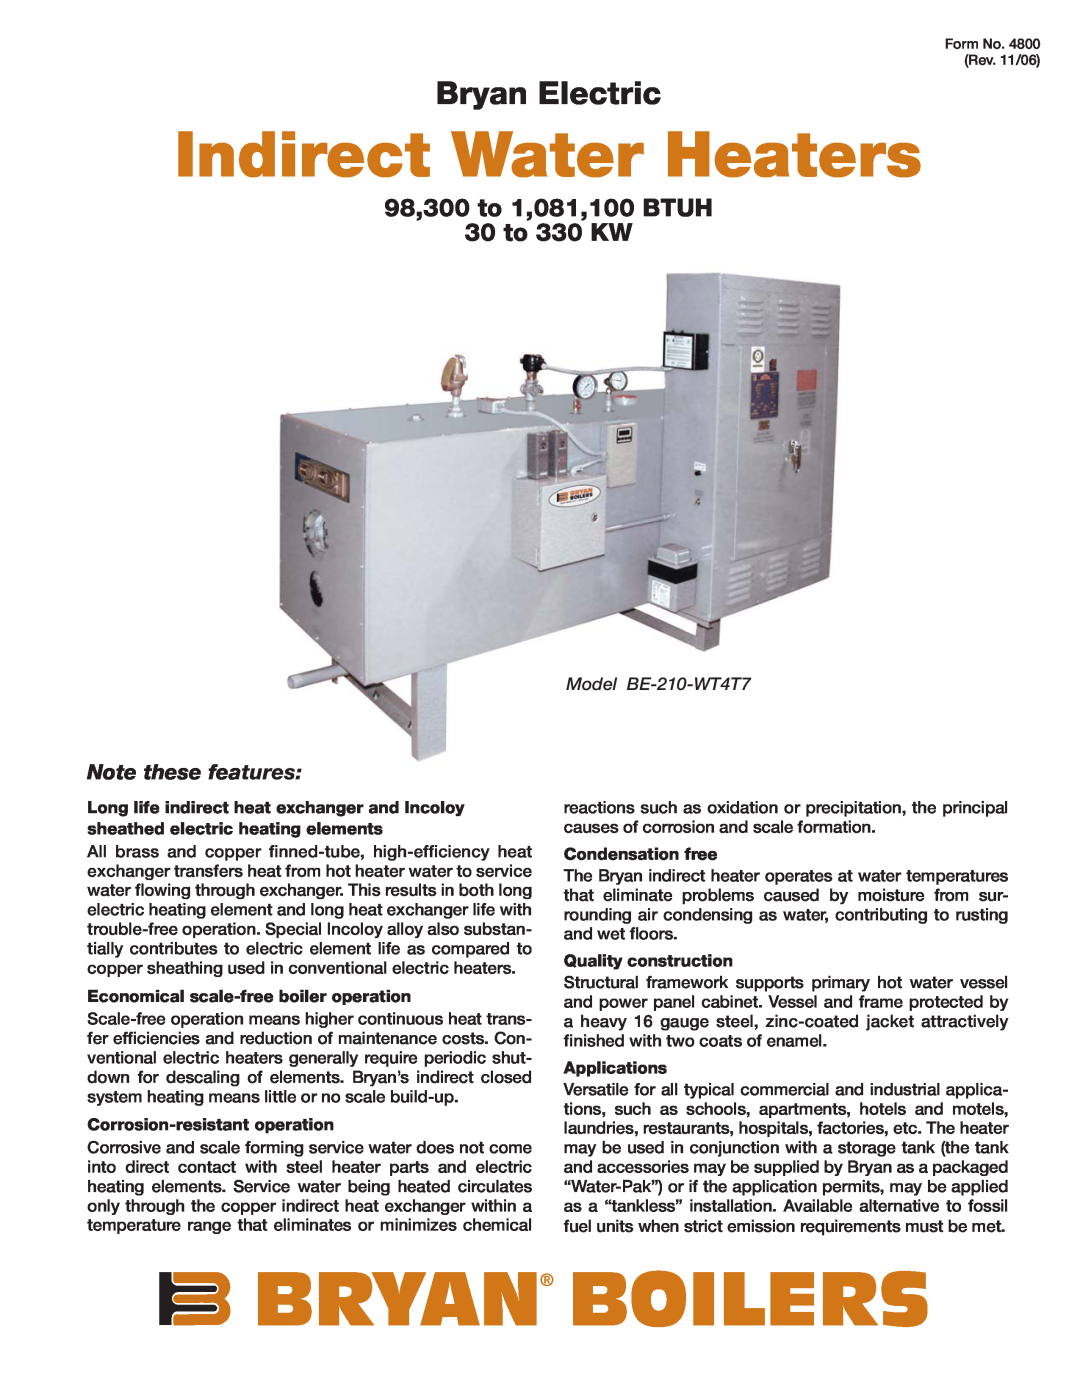 Bryan Boilers BE-210-WT4T7 manual Bryan Boilers, Indirect Water Heaters, Bryan Electric, Note these features, Applications 